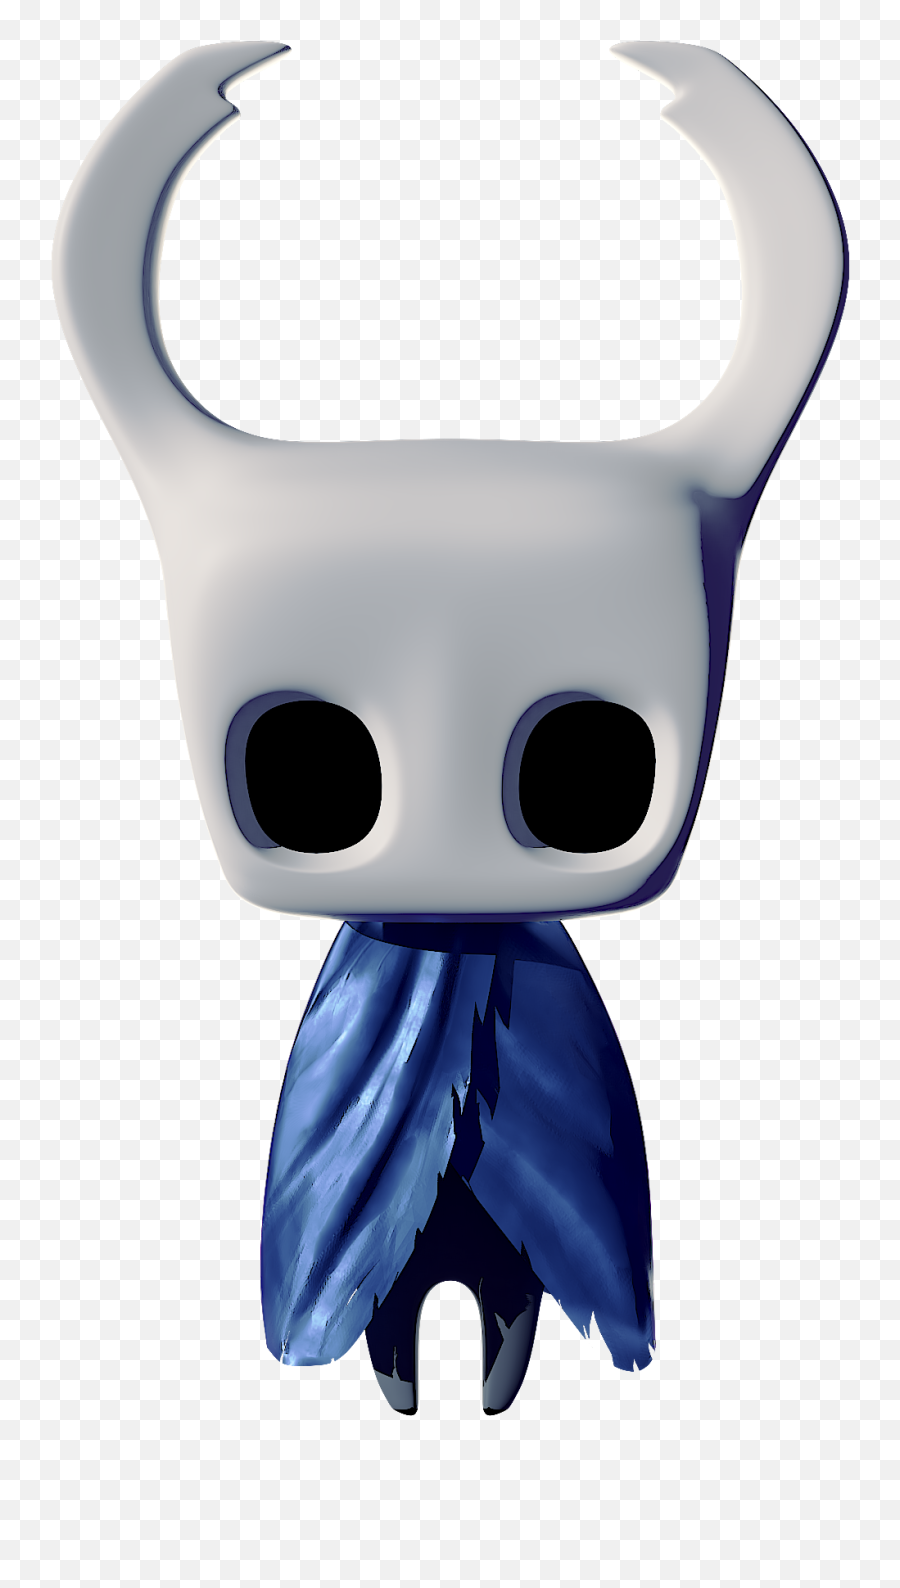 Blender - 3d Rendered Hd Png,Hollow Knight Png